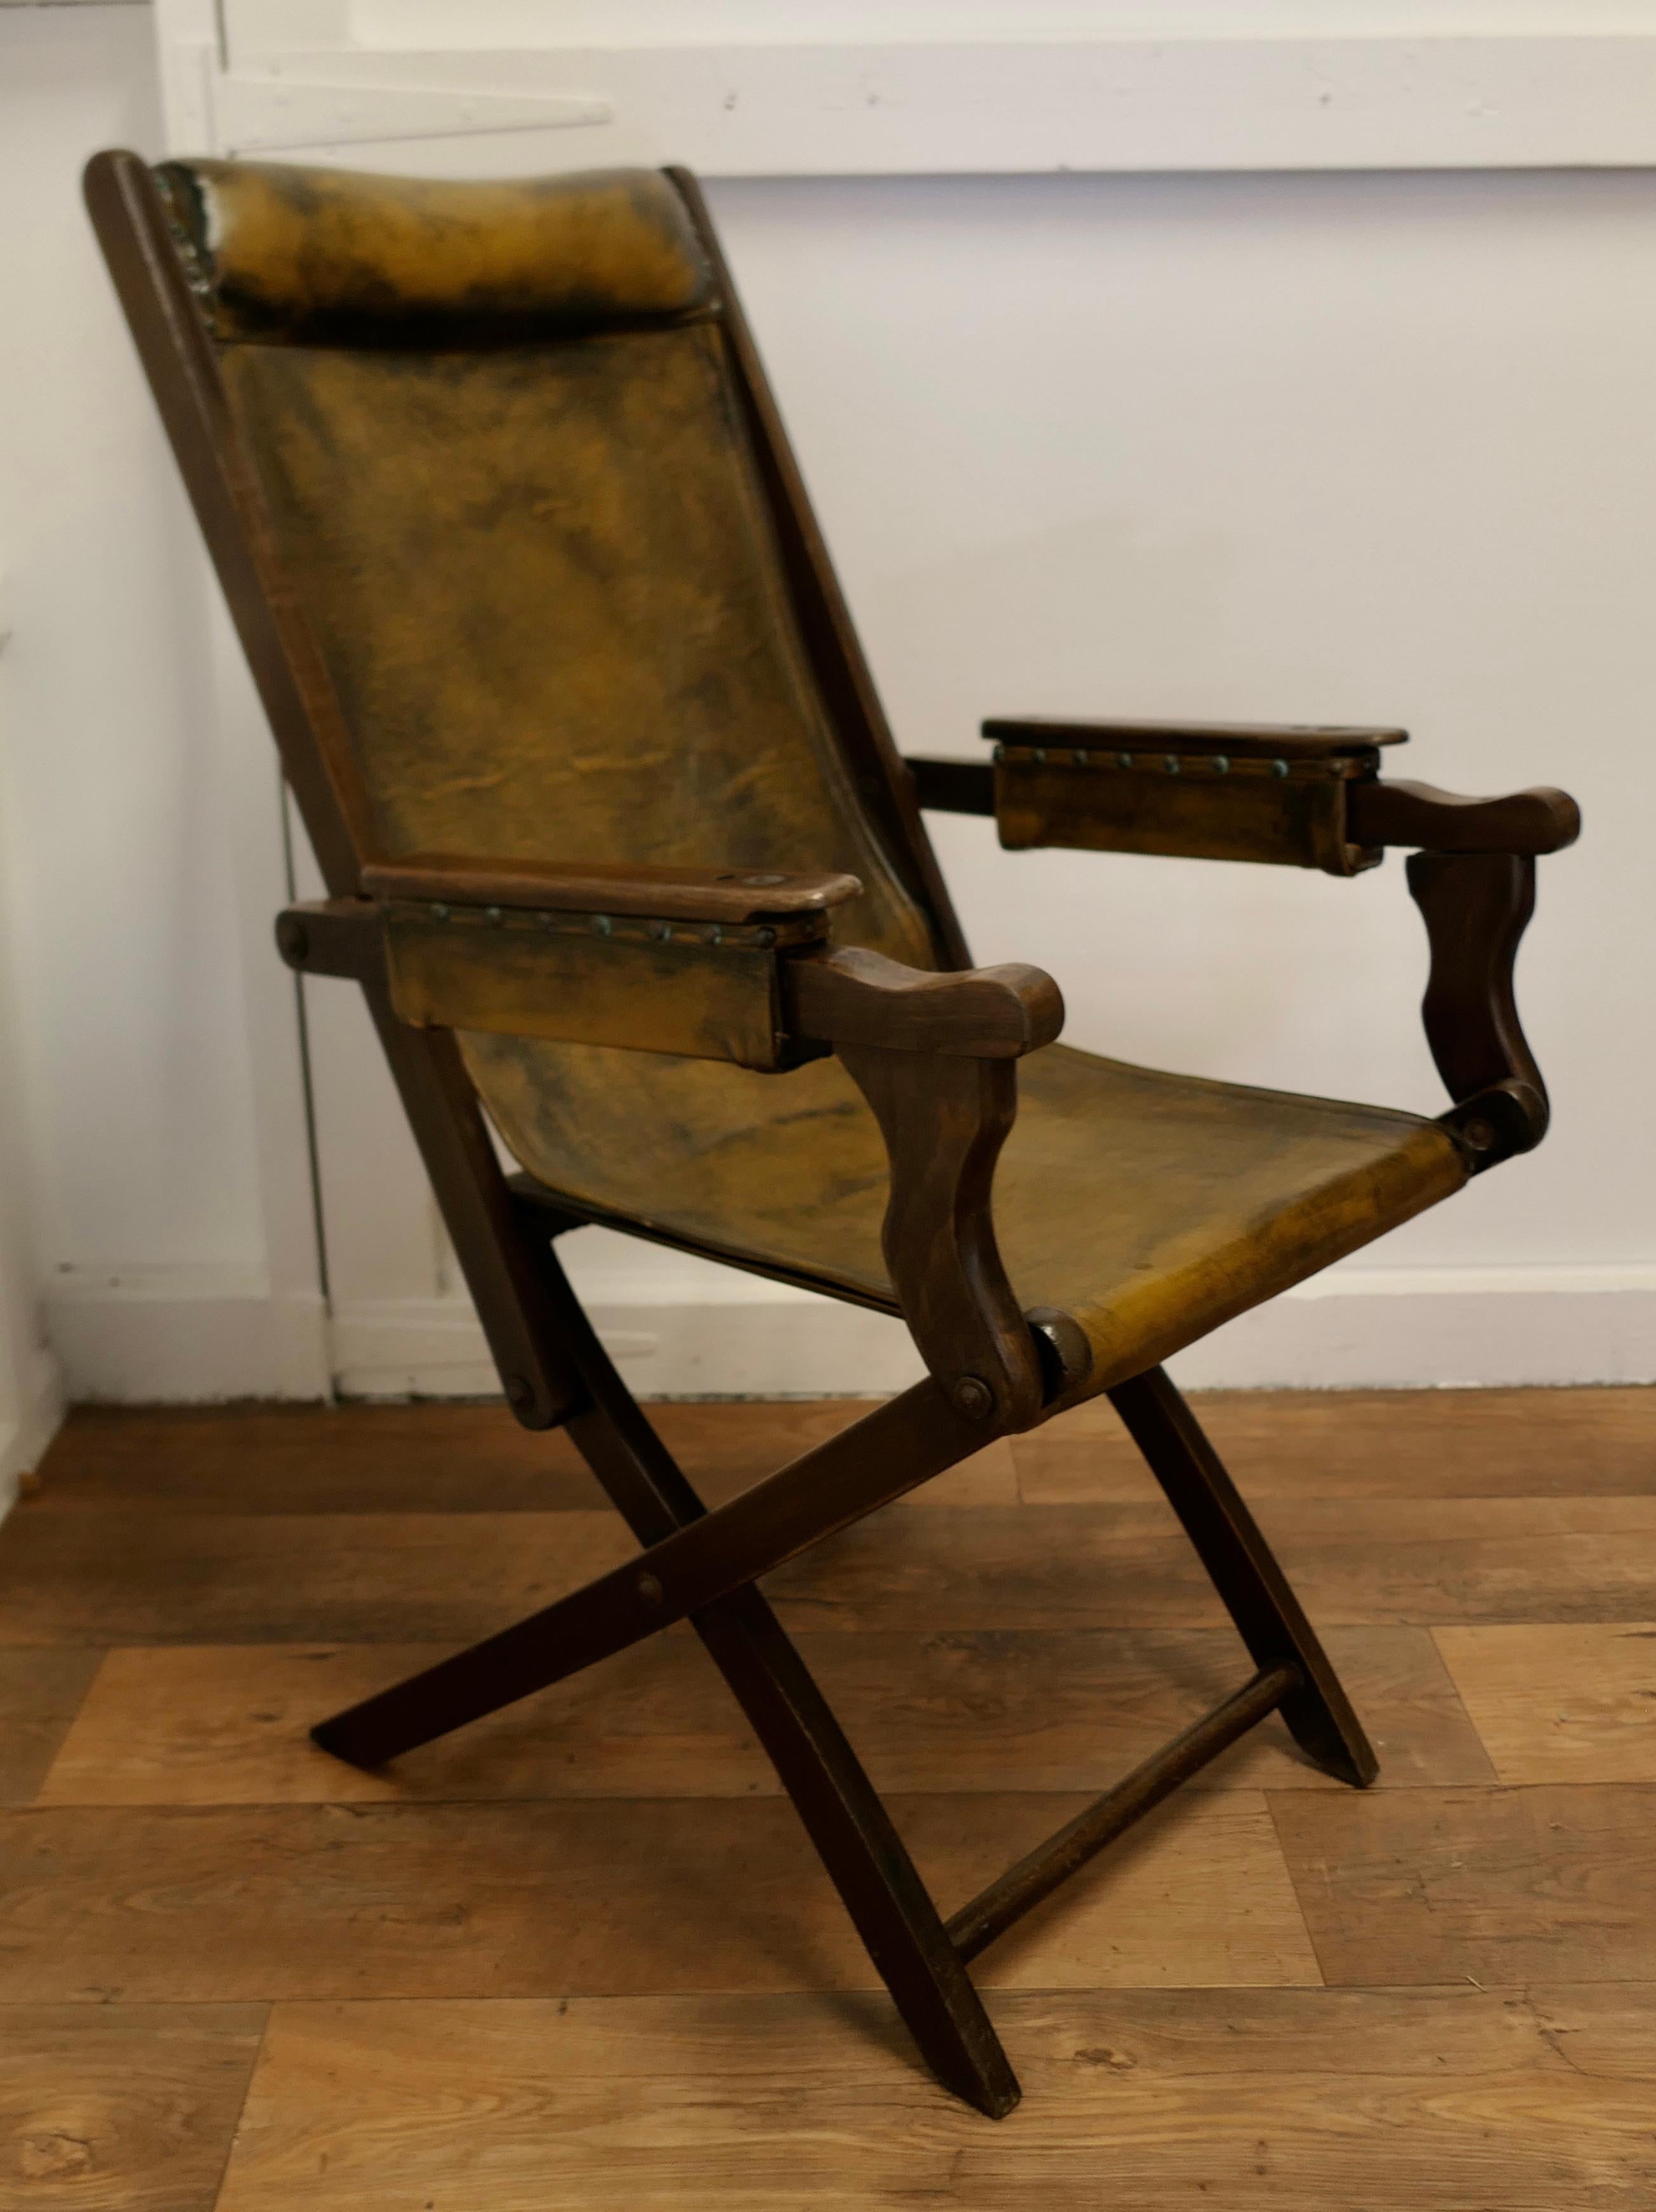 Early 20th Century Edwardian Steamer Chair, Folding Leather Deck Chair Edwardian Steamer Chair For Sale